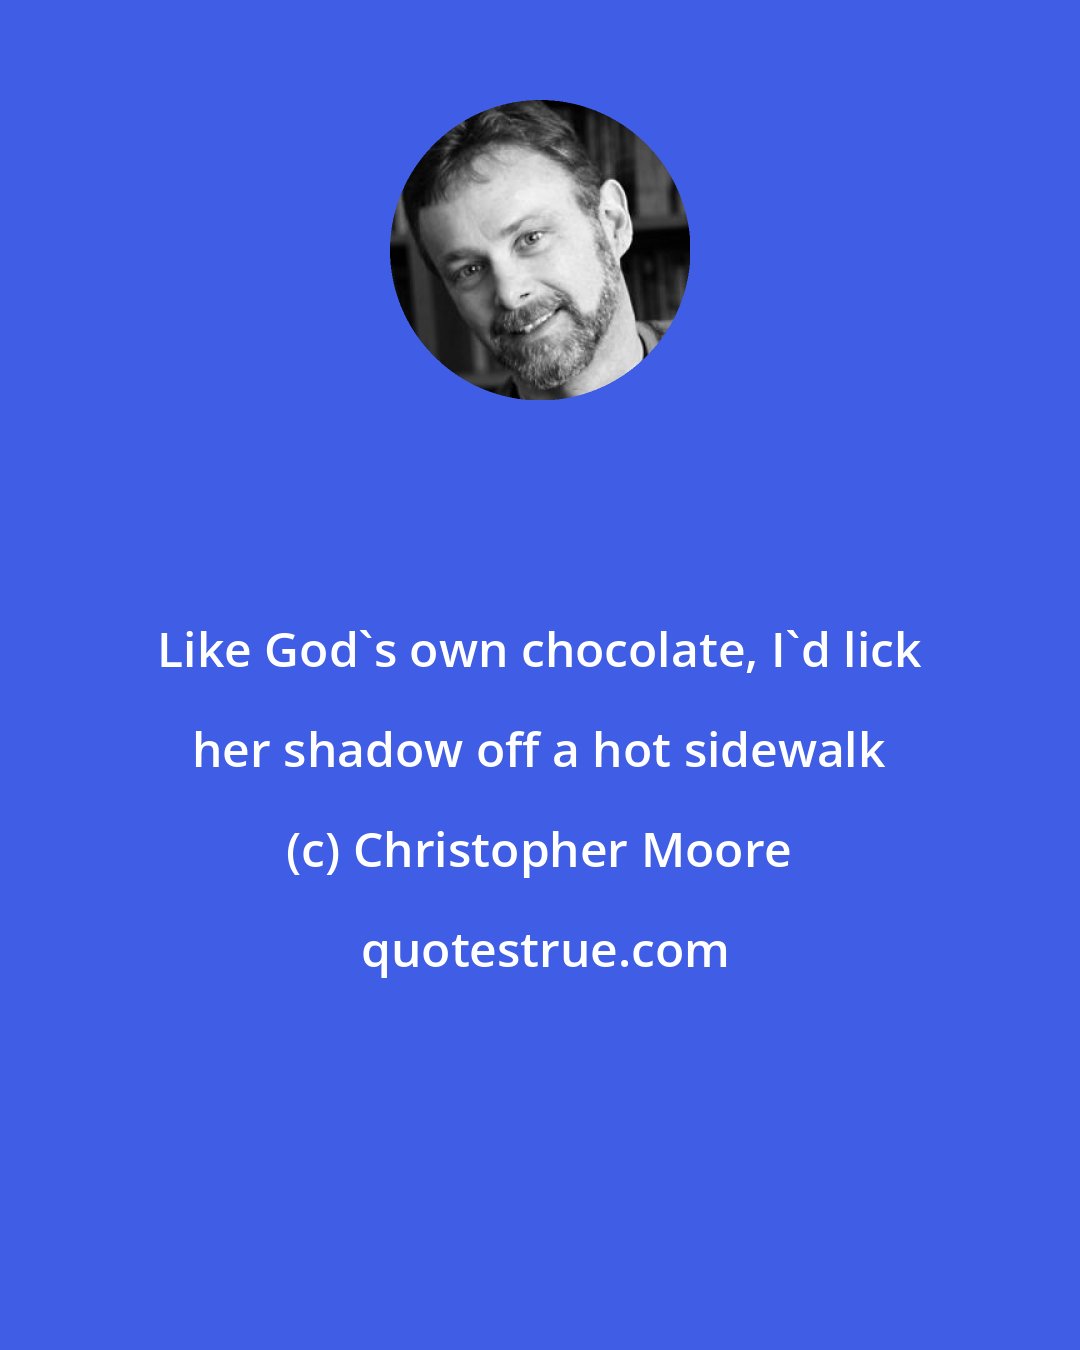 Christopher Moore: Like God's own chocolate, I'd lick her shadow off a hot sidewalk